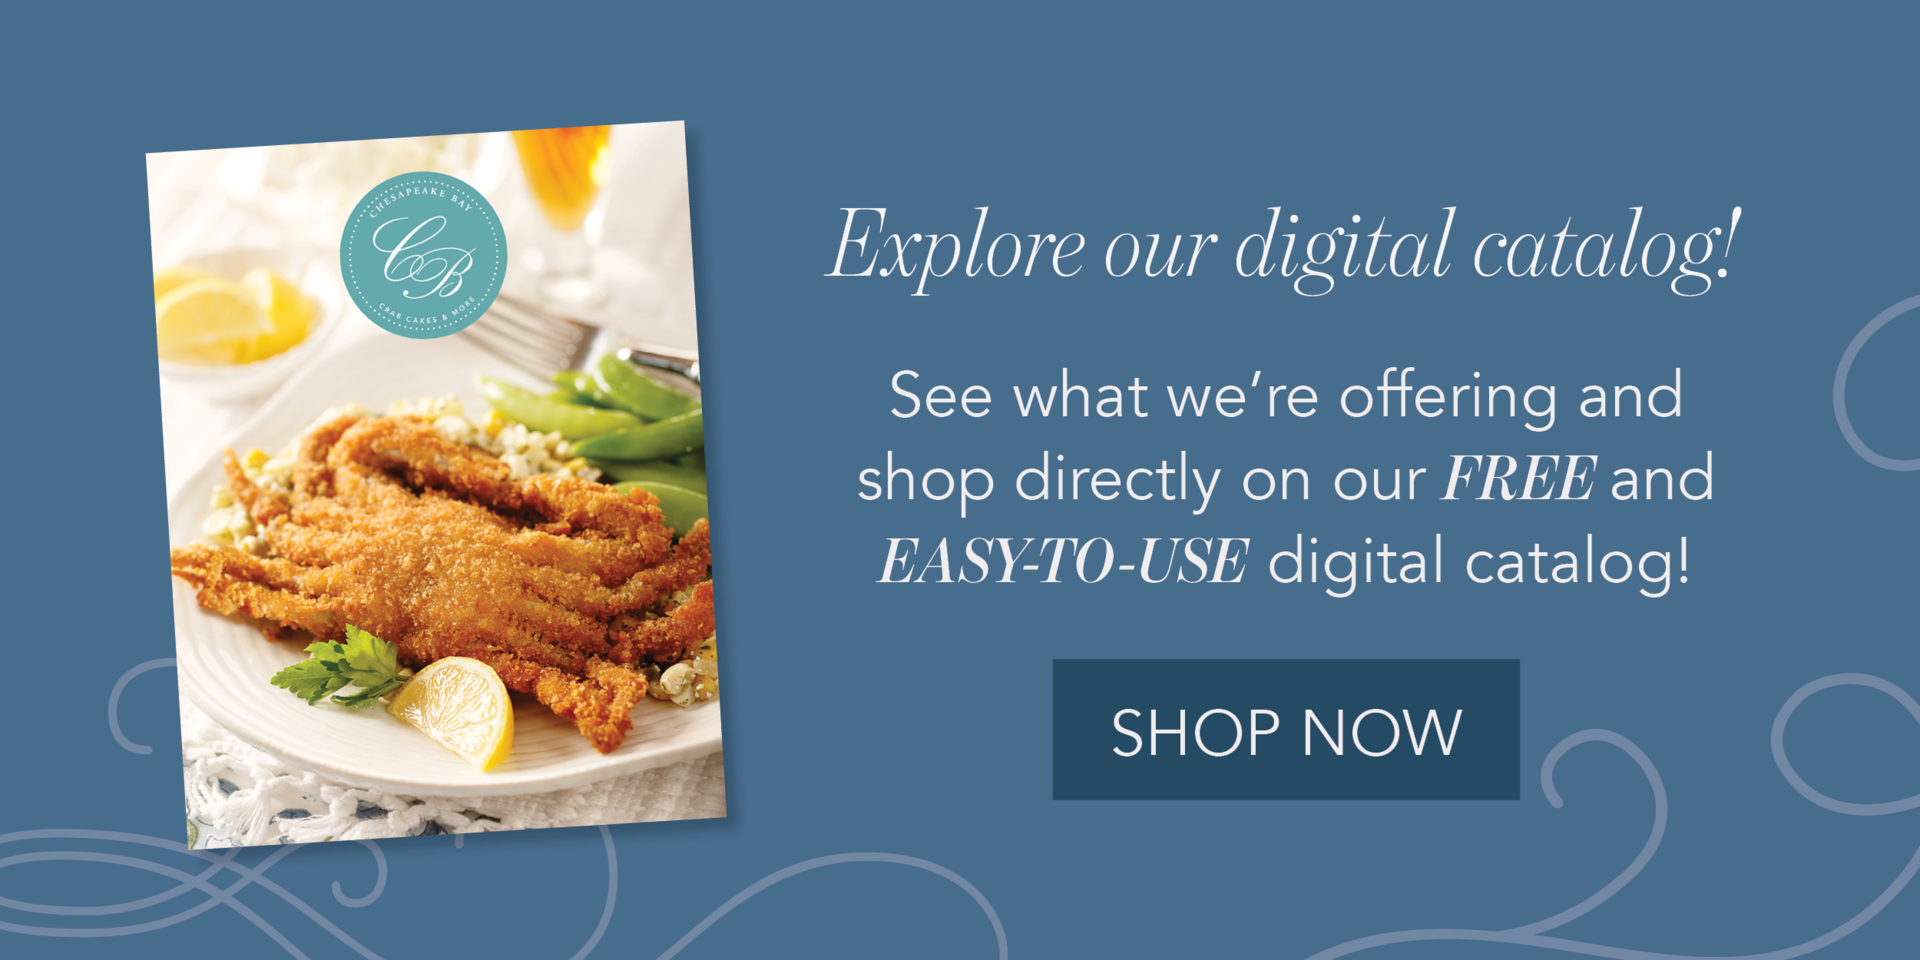 Browse the digital catalog